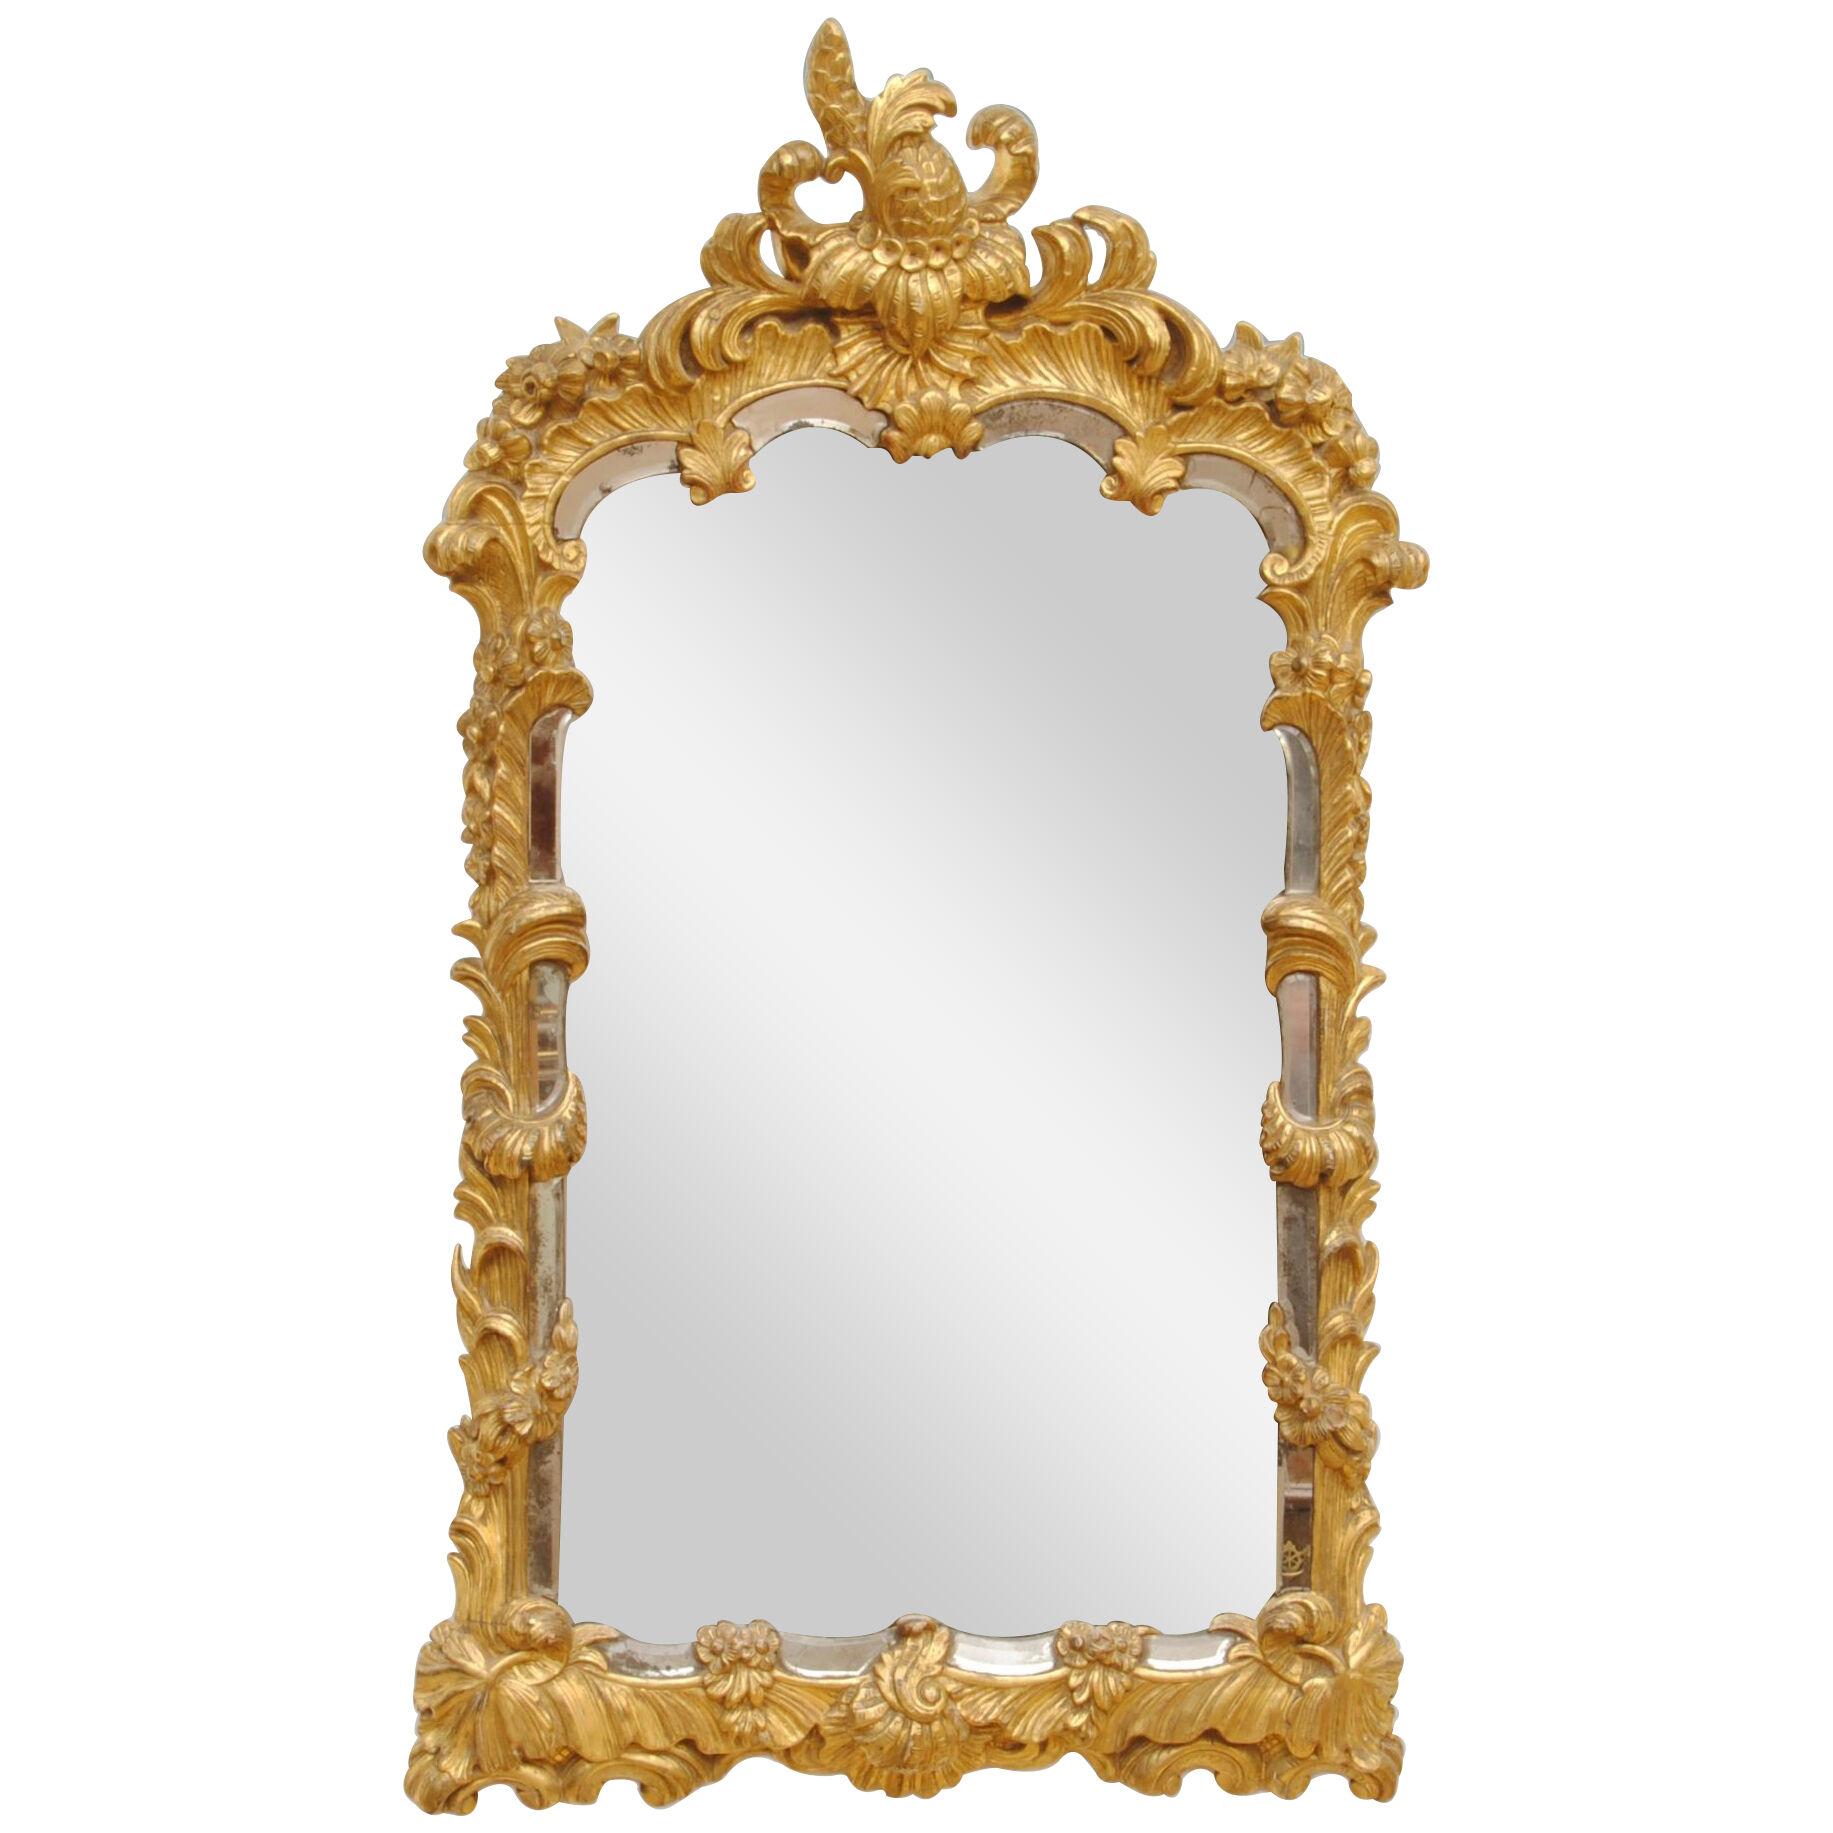 LATE 18TH CENTURY GILT WOOD AND BORDERED MIRROR